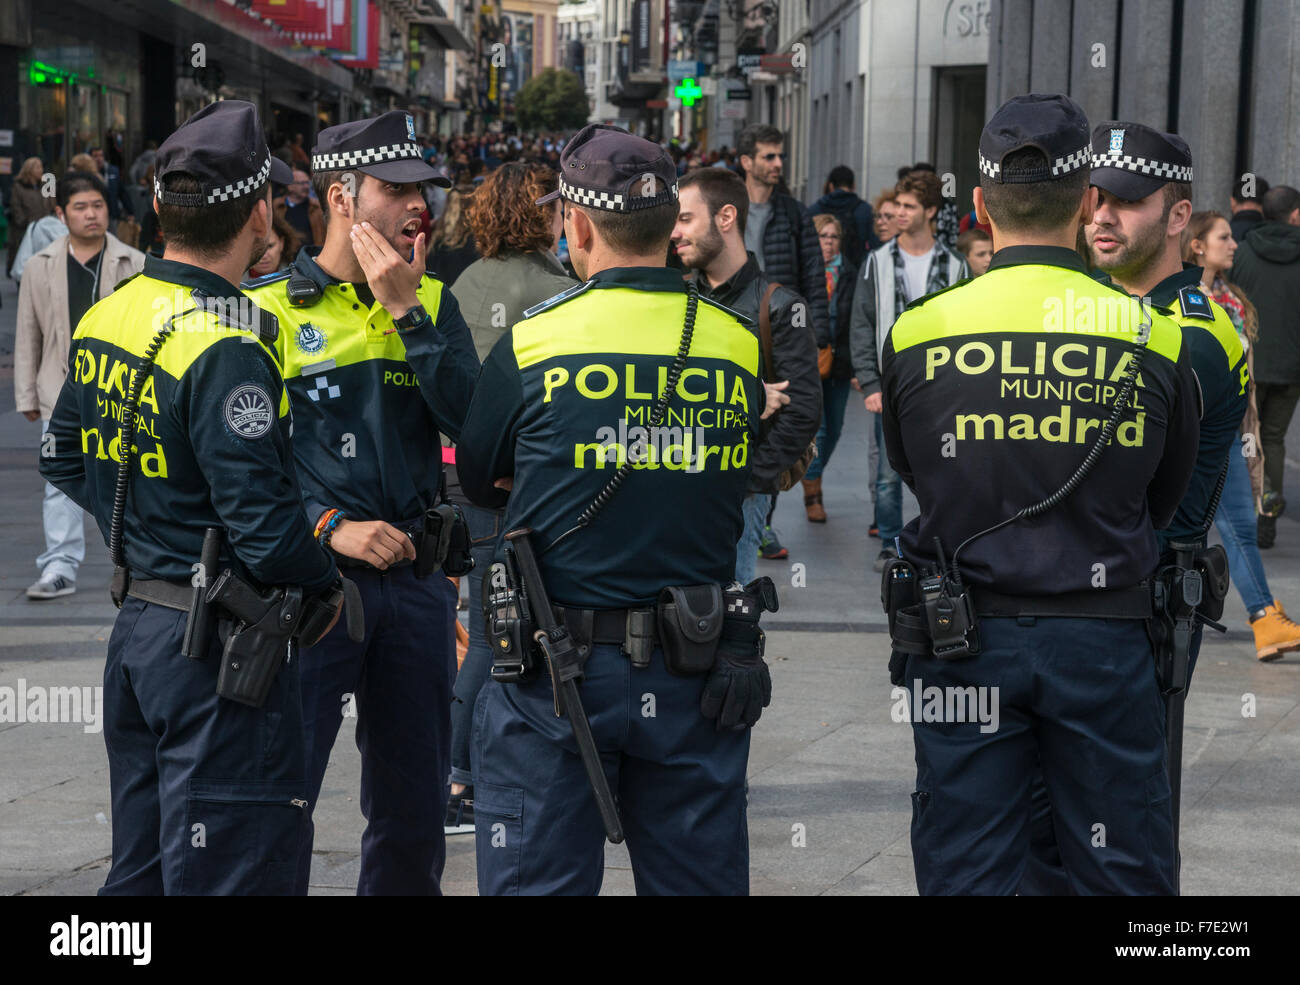 Municipal Police on duty in the Puerta del Sol, Madrid, Spain Stock Photo